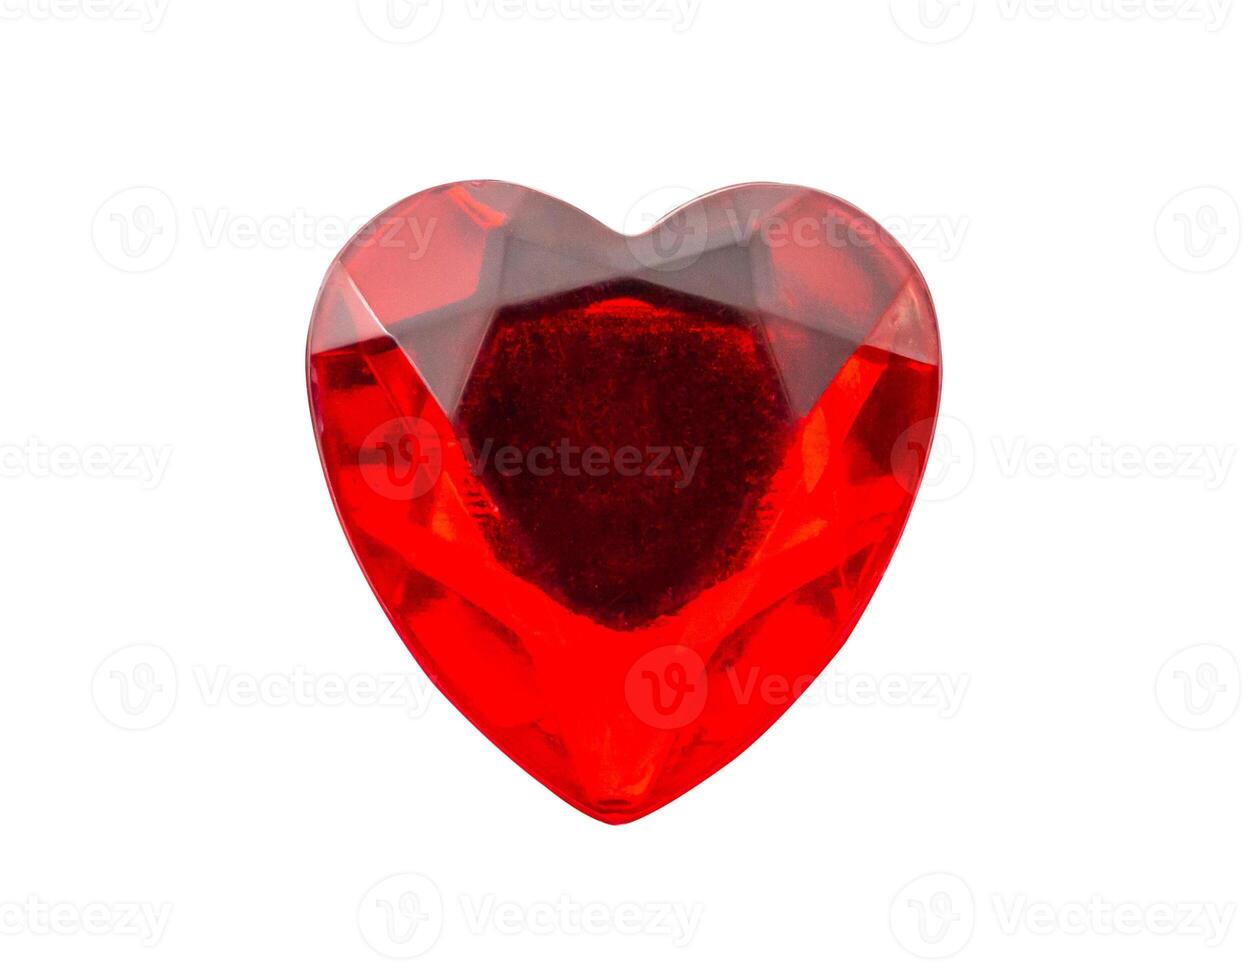 Red heart shape crystal valentines day symbol sticker isolated on white background photo